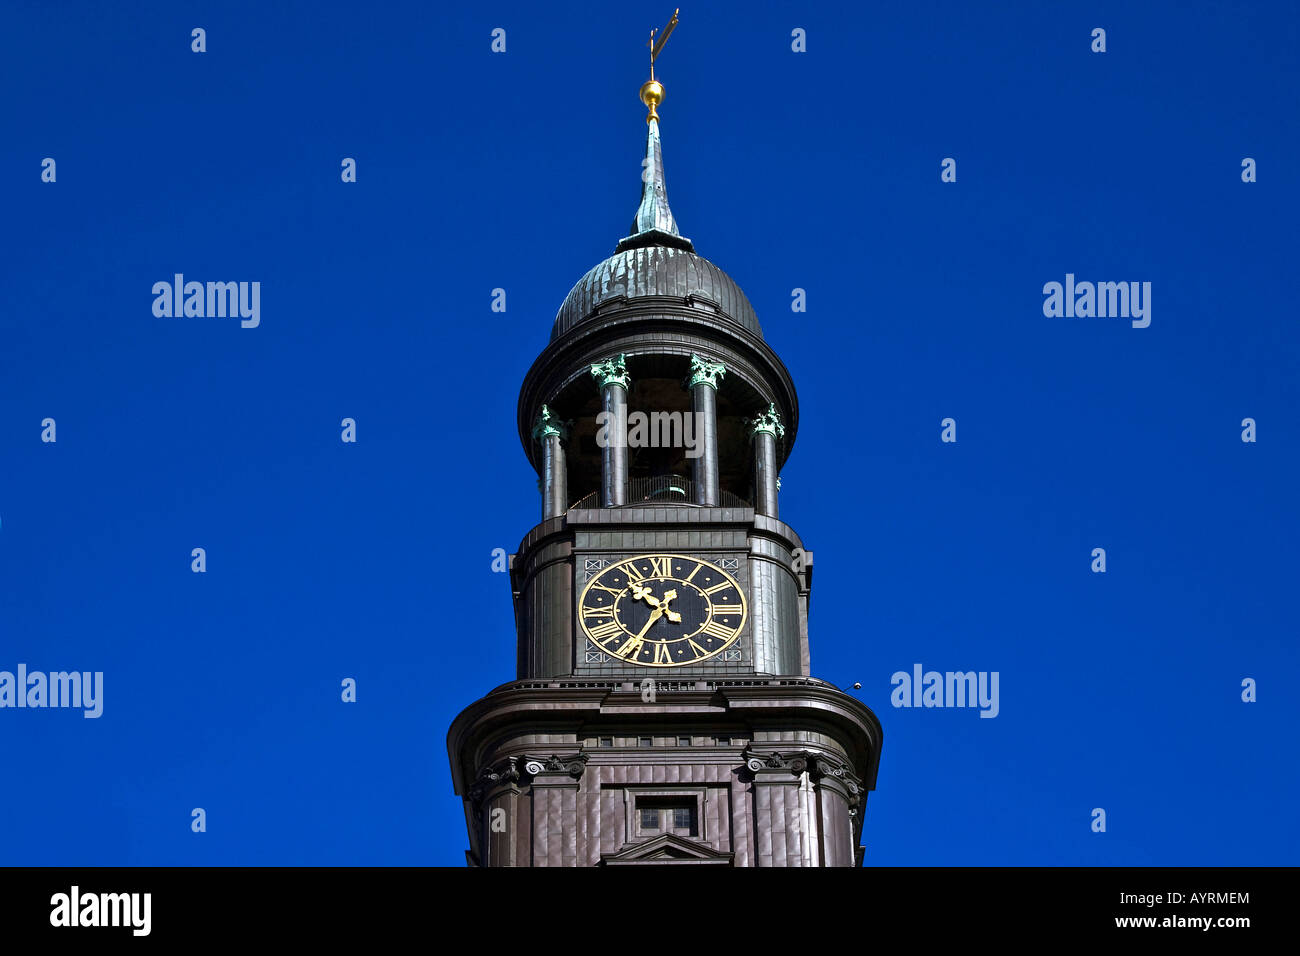 Top of the tower and clock of the St. Michaelis Church, Hamburg, Germany, Europe Stock Photo